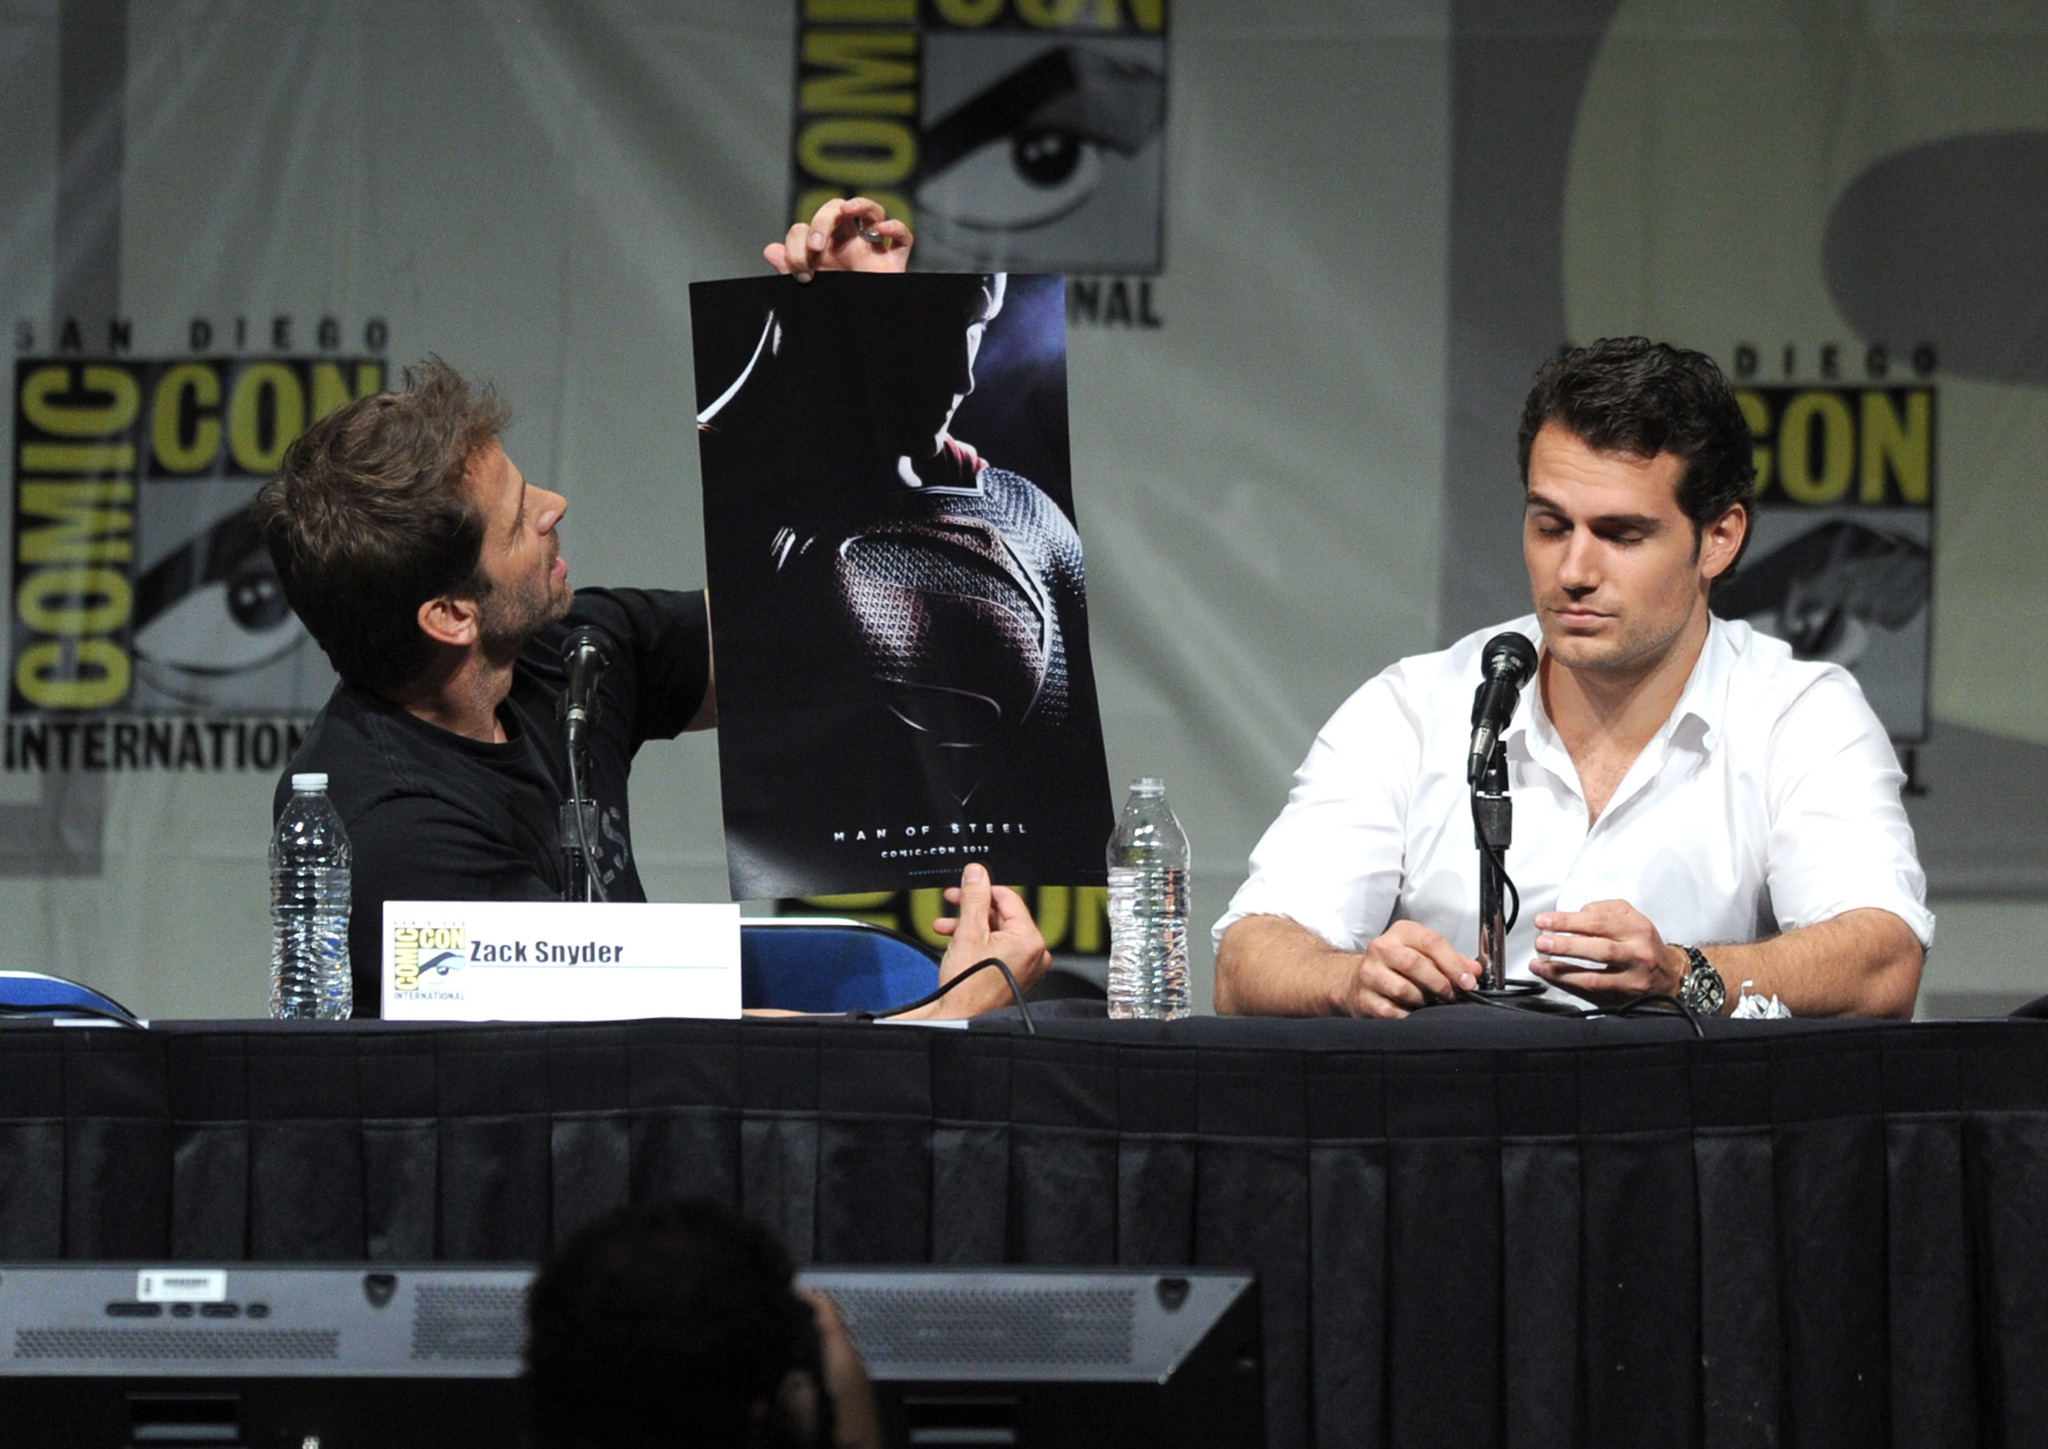 Henry Cavill and Zack Snyder at event of Zmogus is plieno (2013)